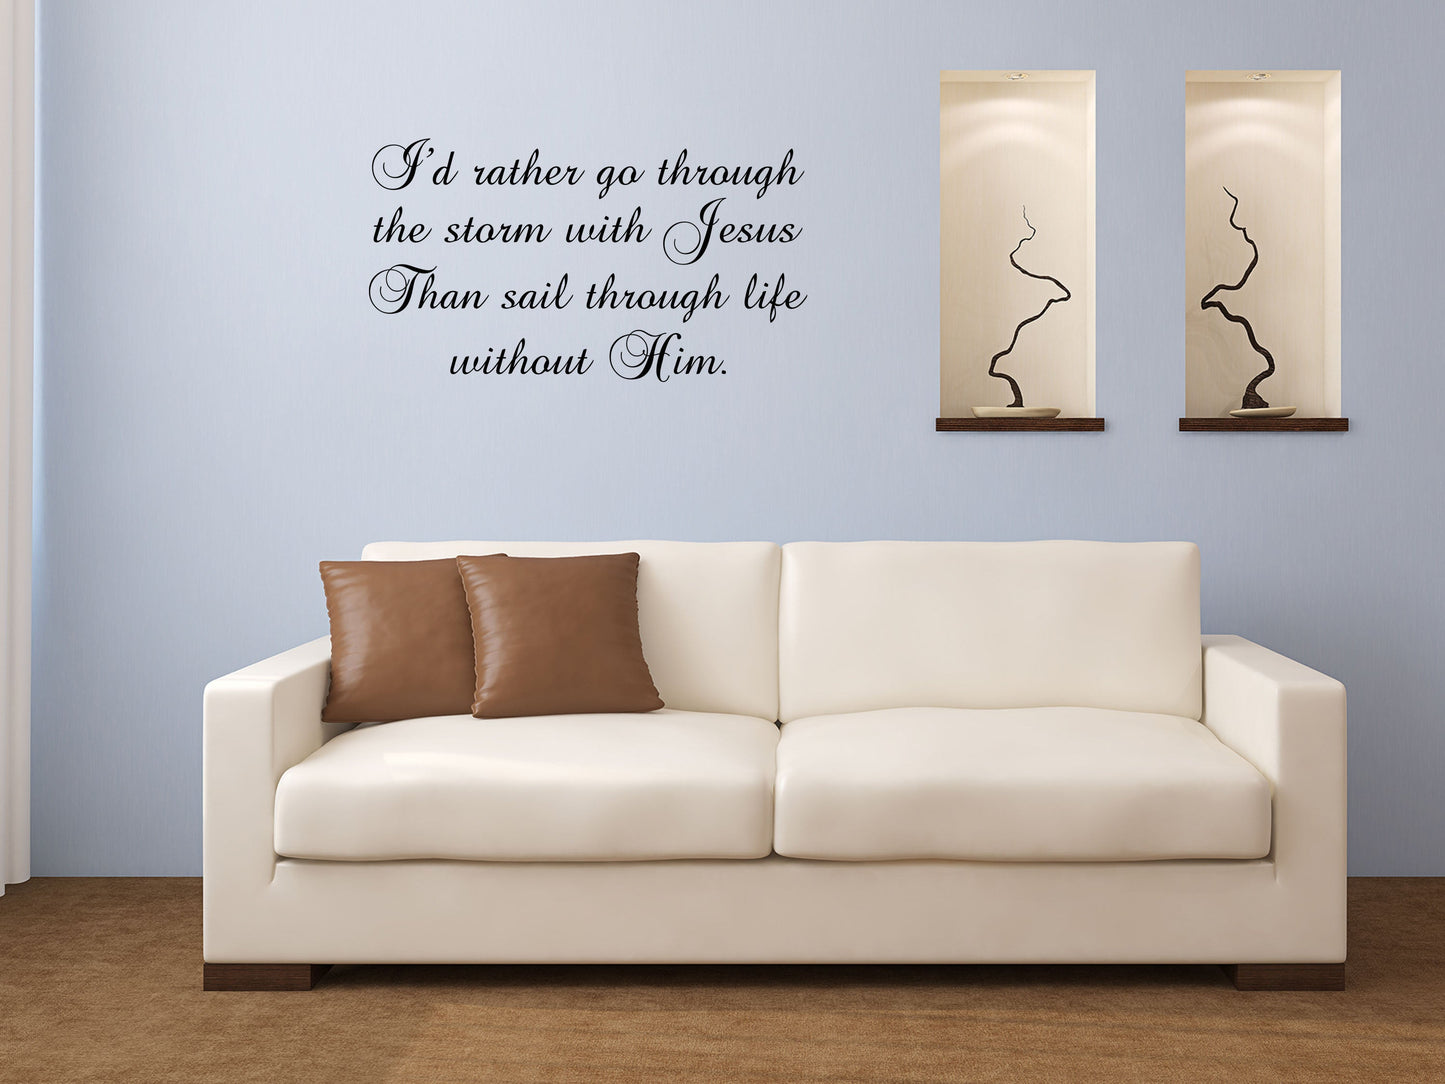 I'd Rather Go Through The Storm With Jesus Wall Stickers - Wall Decor Stickers - Christian Inspirational Bible Decal Vinyl Wall Decal Done 